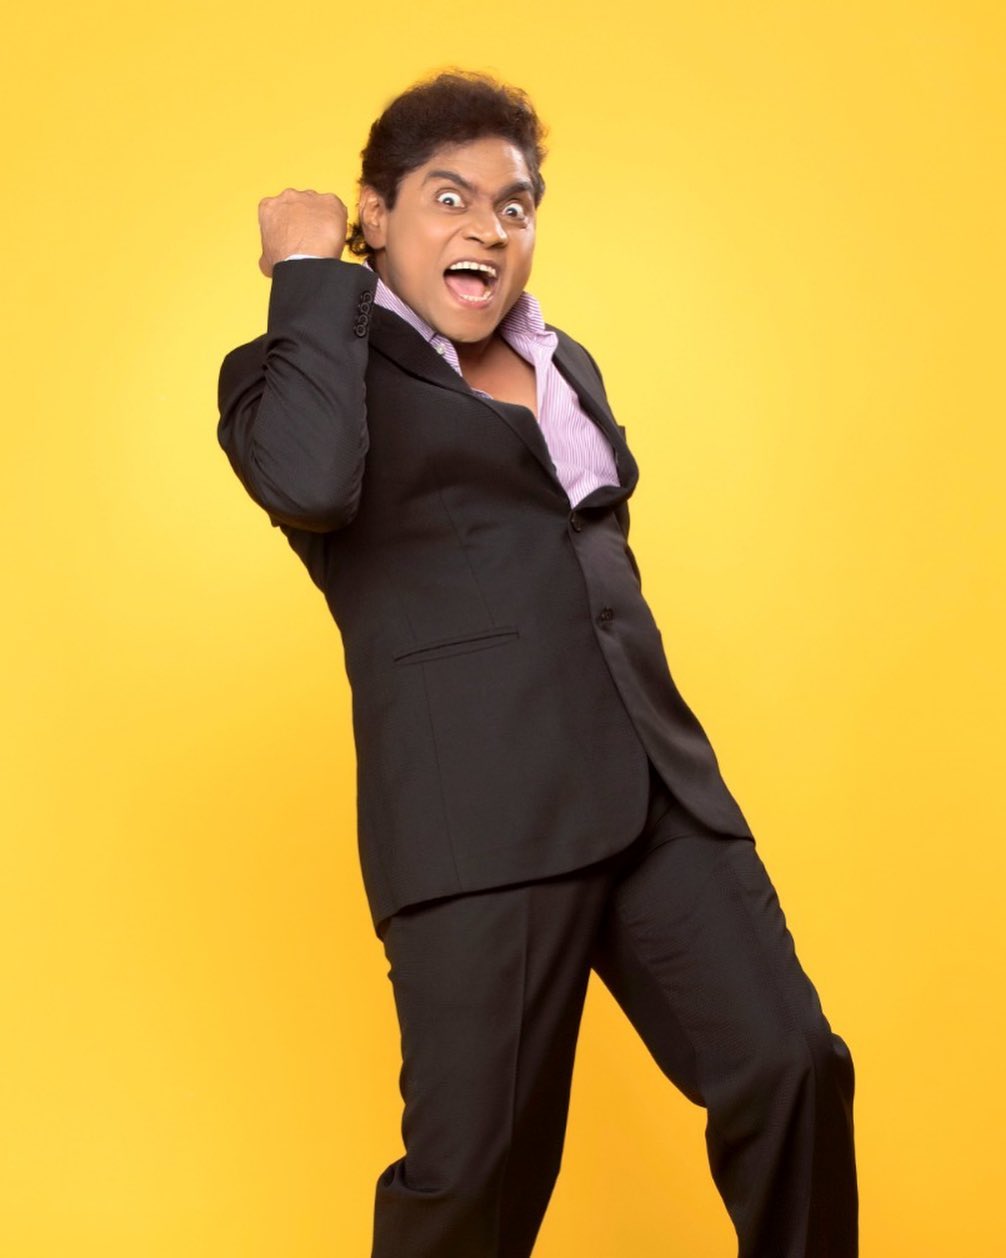 Johnny lever net worth in rupees 2022